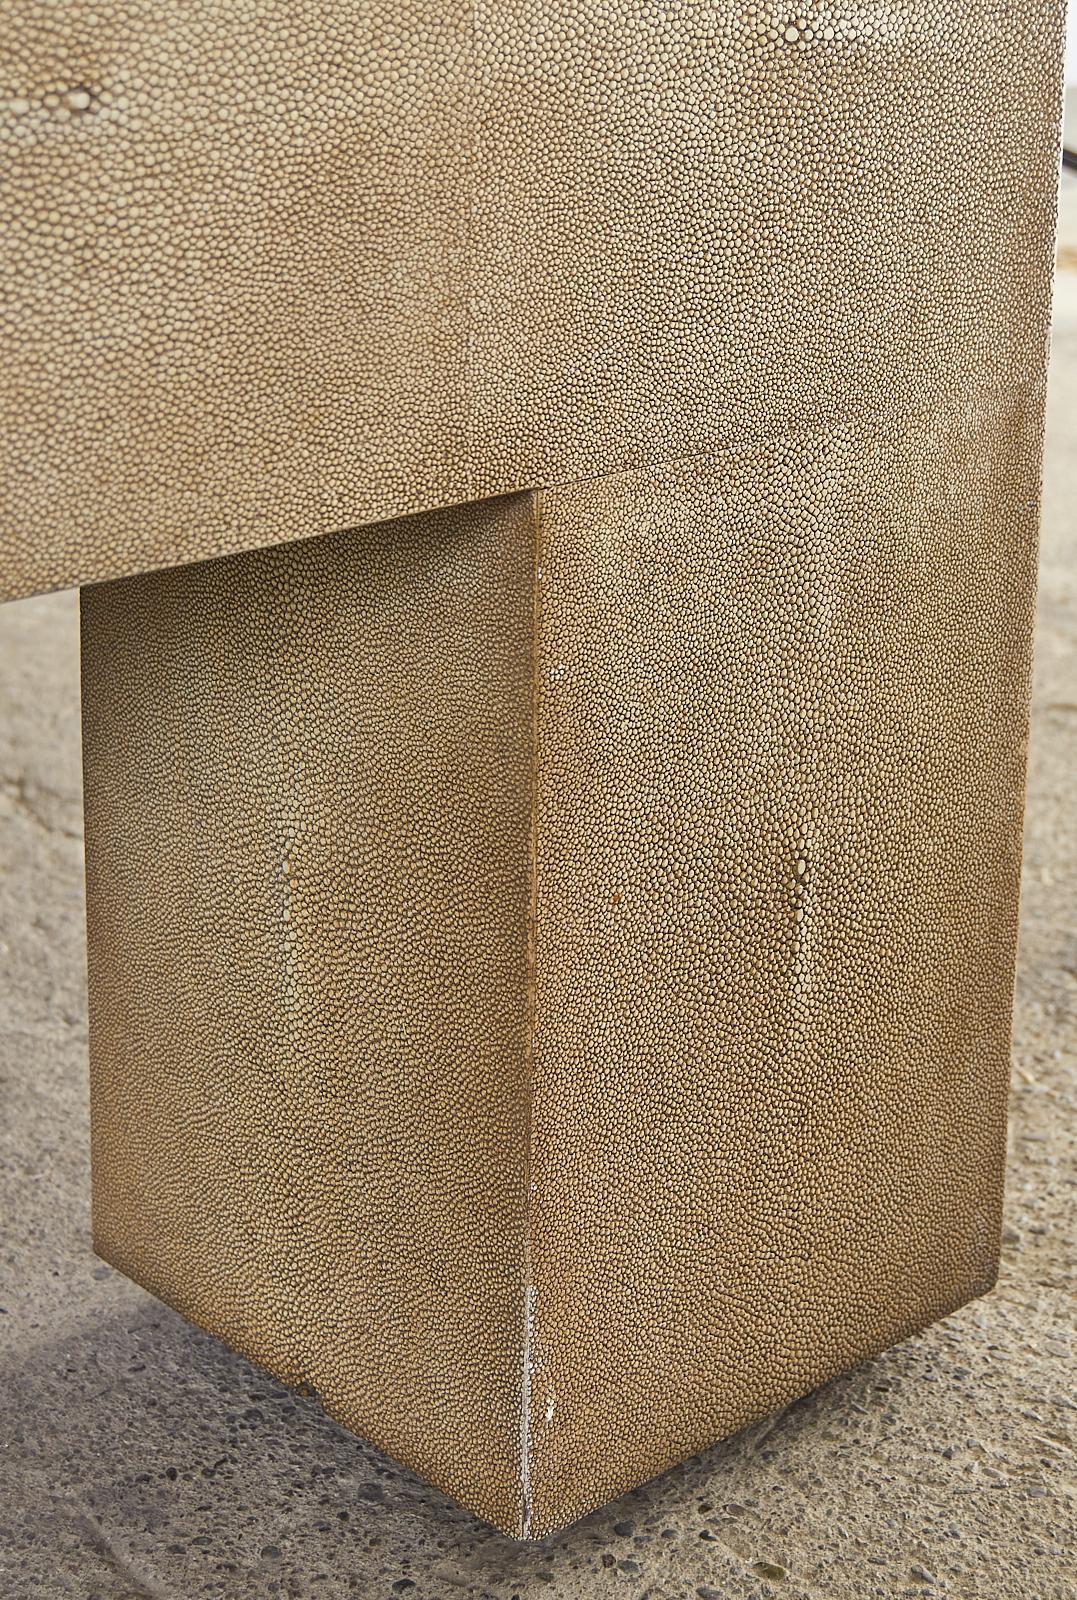 Hand-Crafted Lillian August Faux Shagreen Gavin Cocktail Table